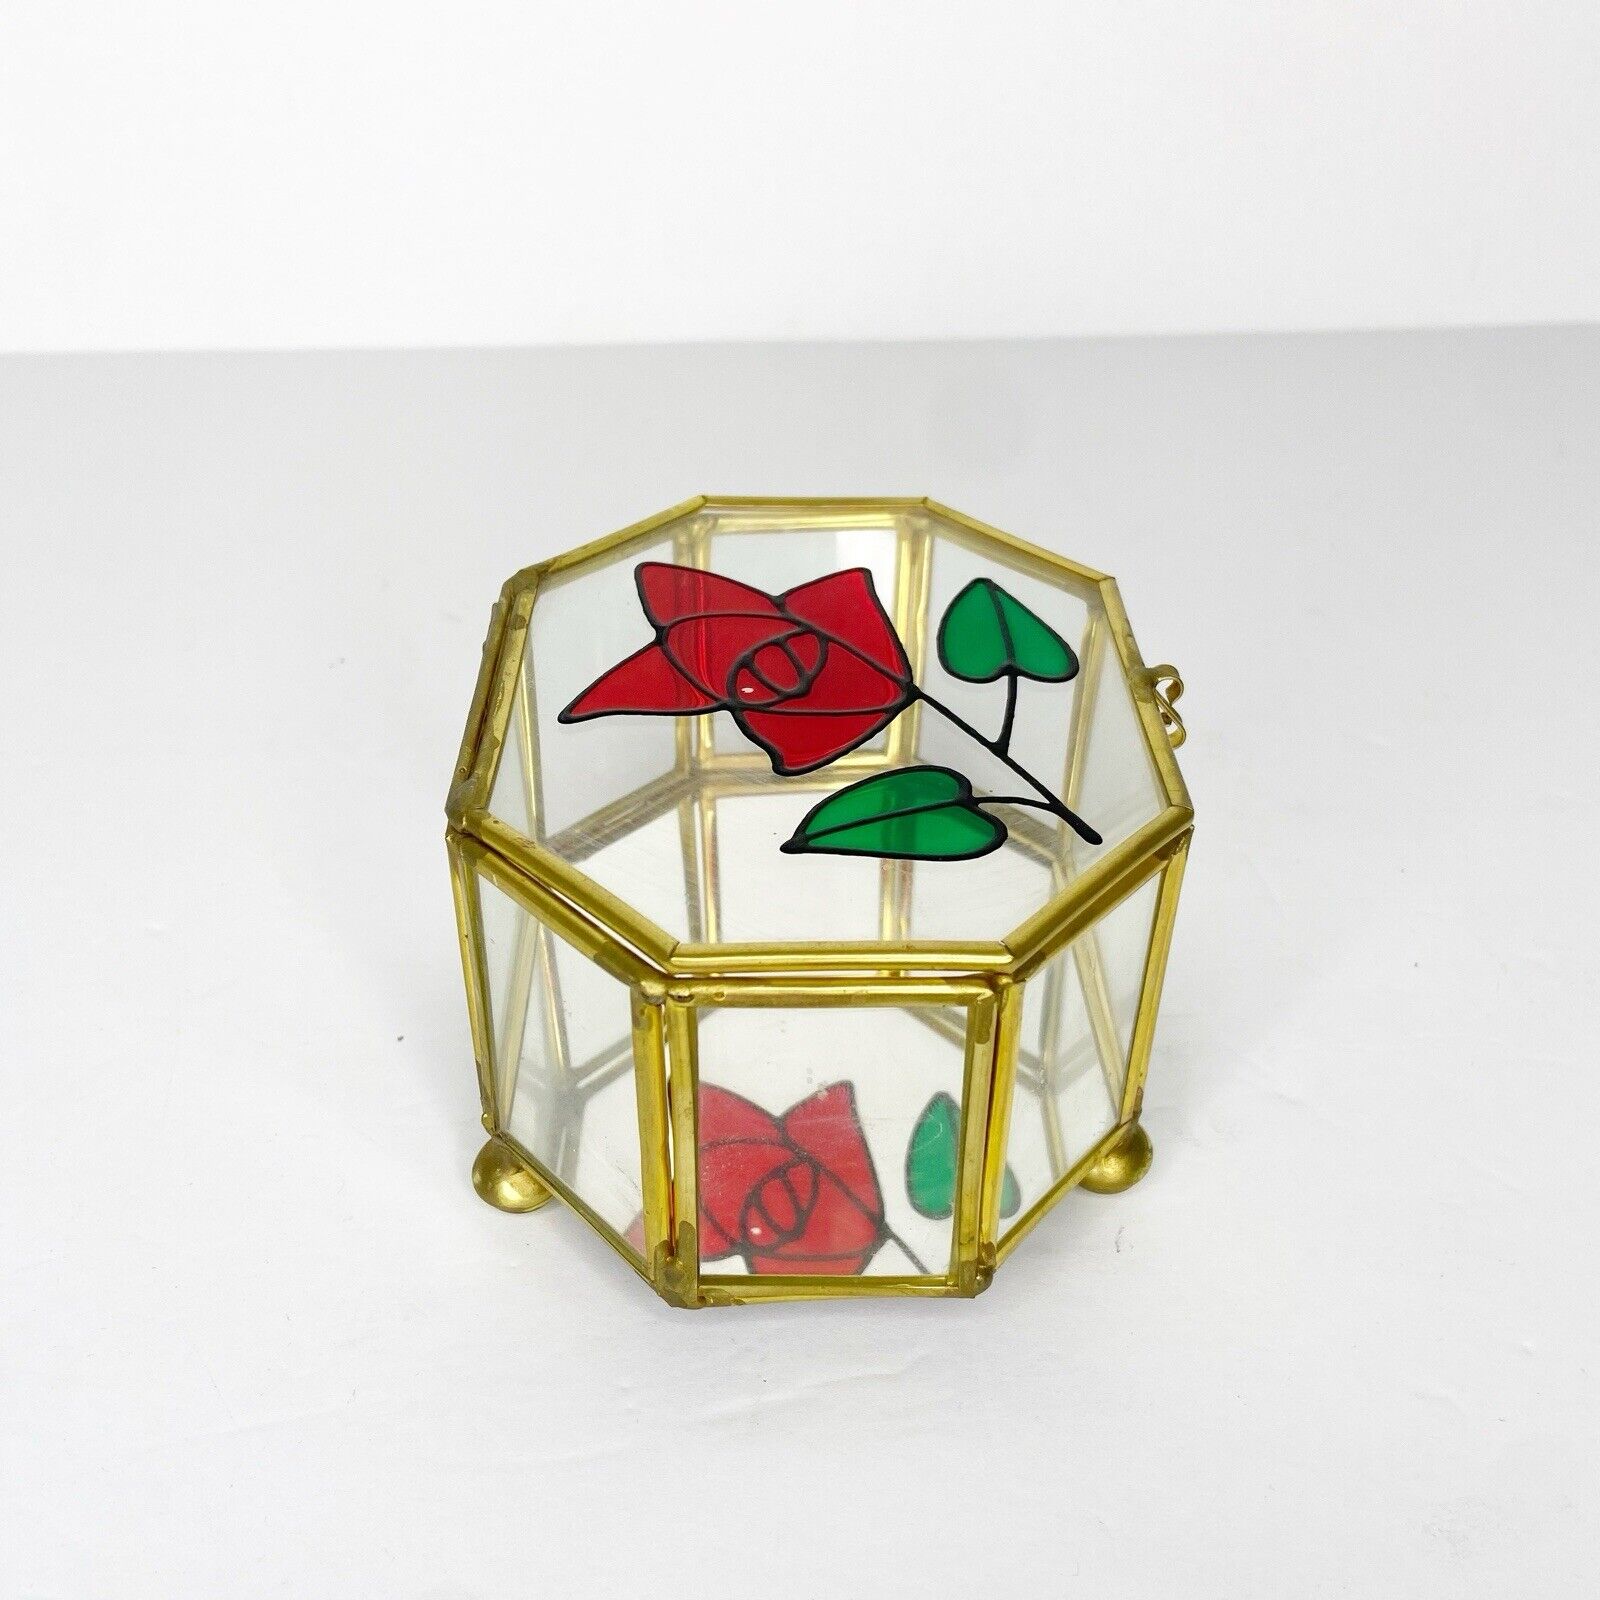 Vintage Red Rose Stained Glass Metal Jewelry Ring Dresser Vanity Trinket Box